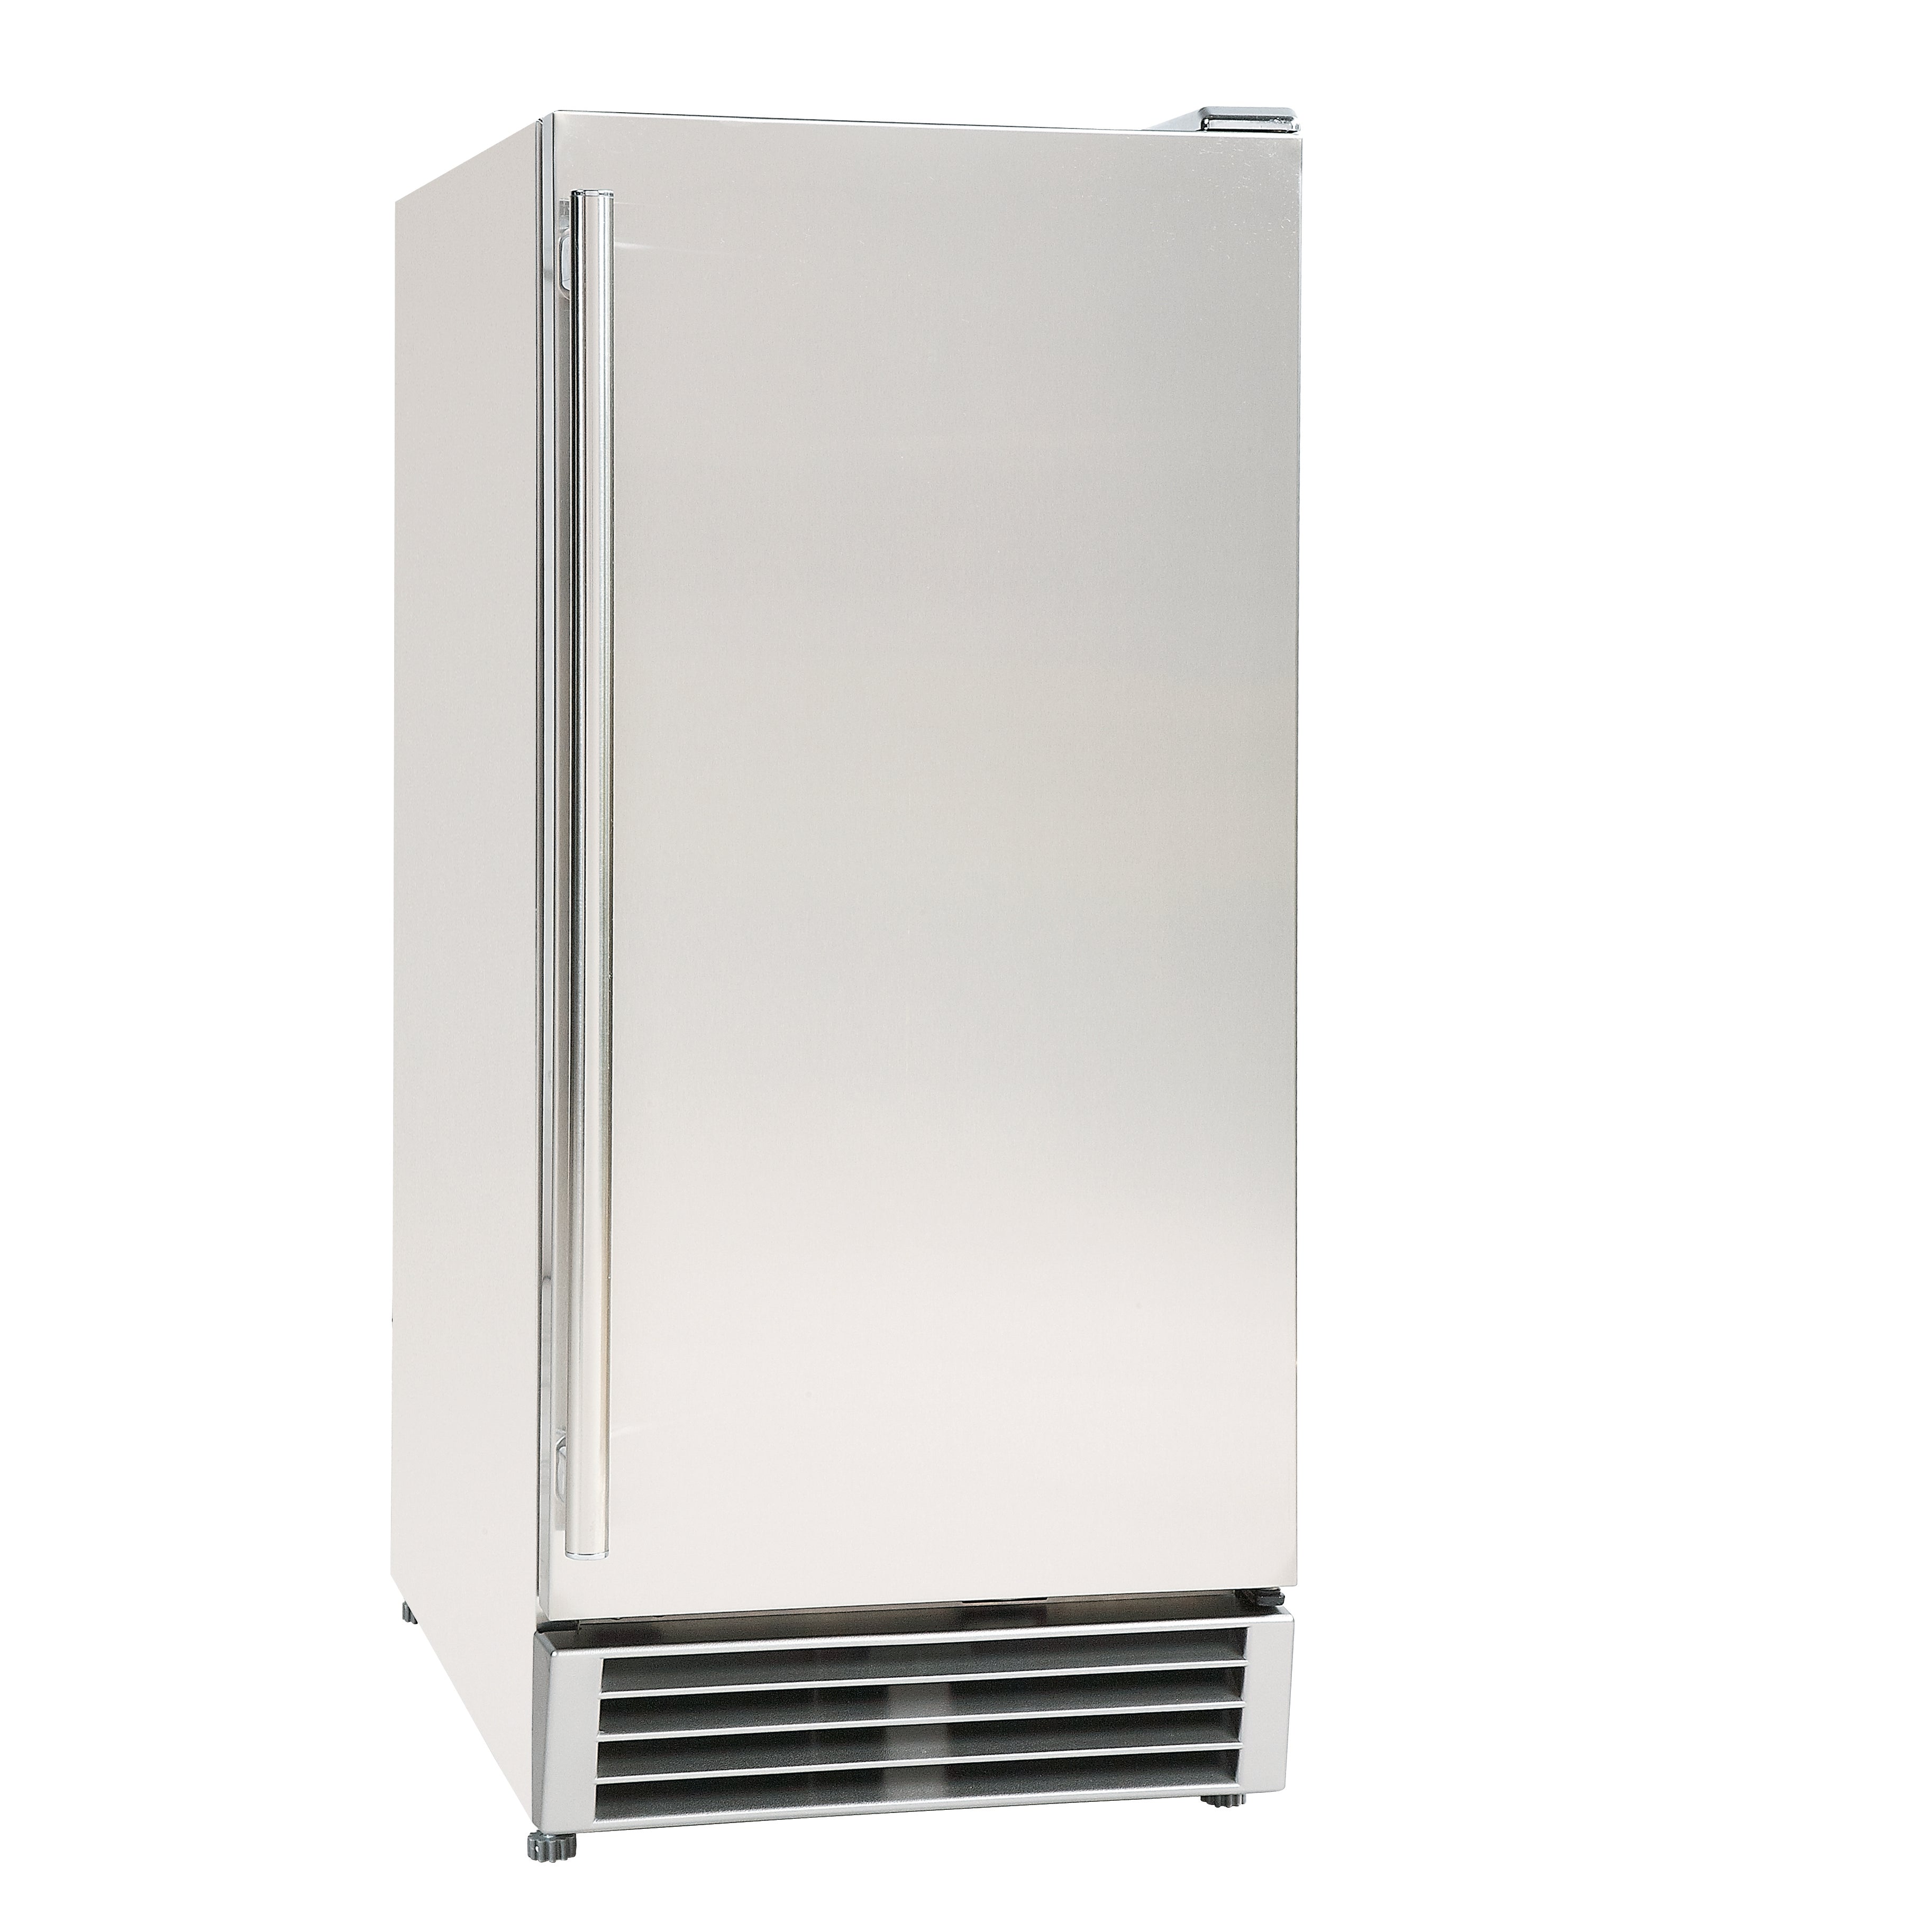 Maxx Ice - MCR3U-O, Maxx Ice Compact Outdoor Refrigerator, 15"W, 3 cu. ft. Capacity, in Stainless Steel